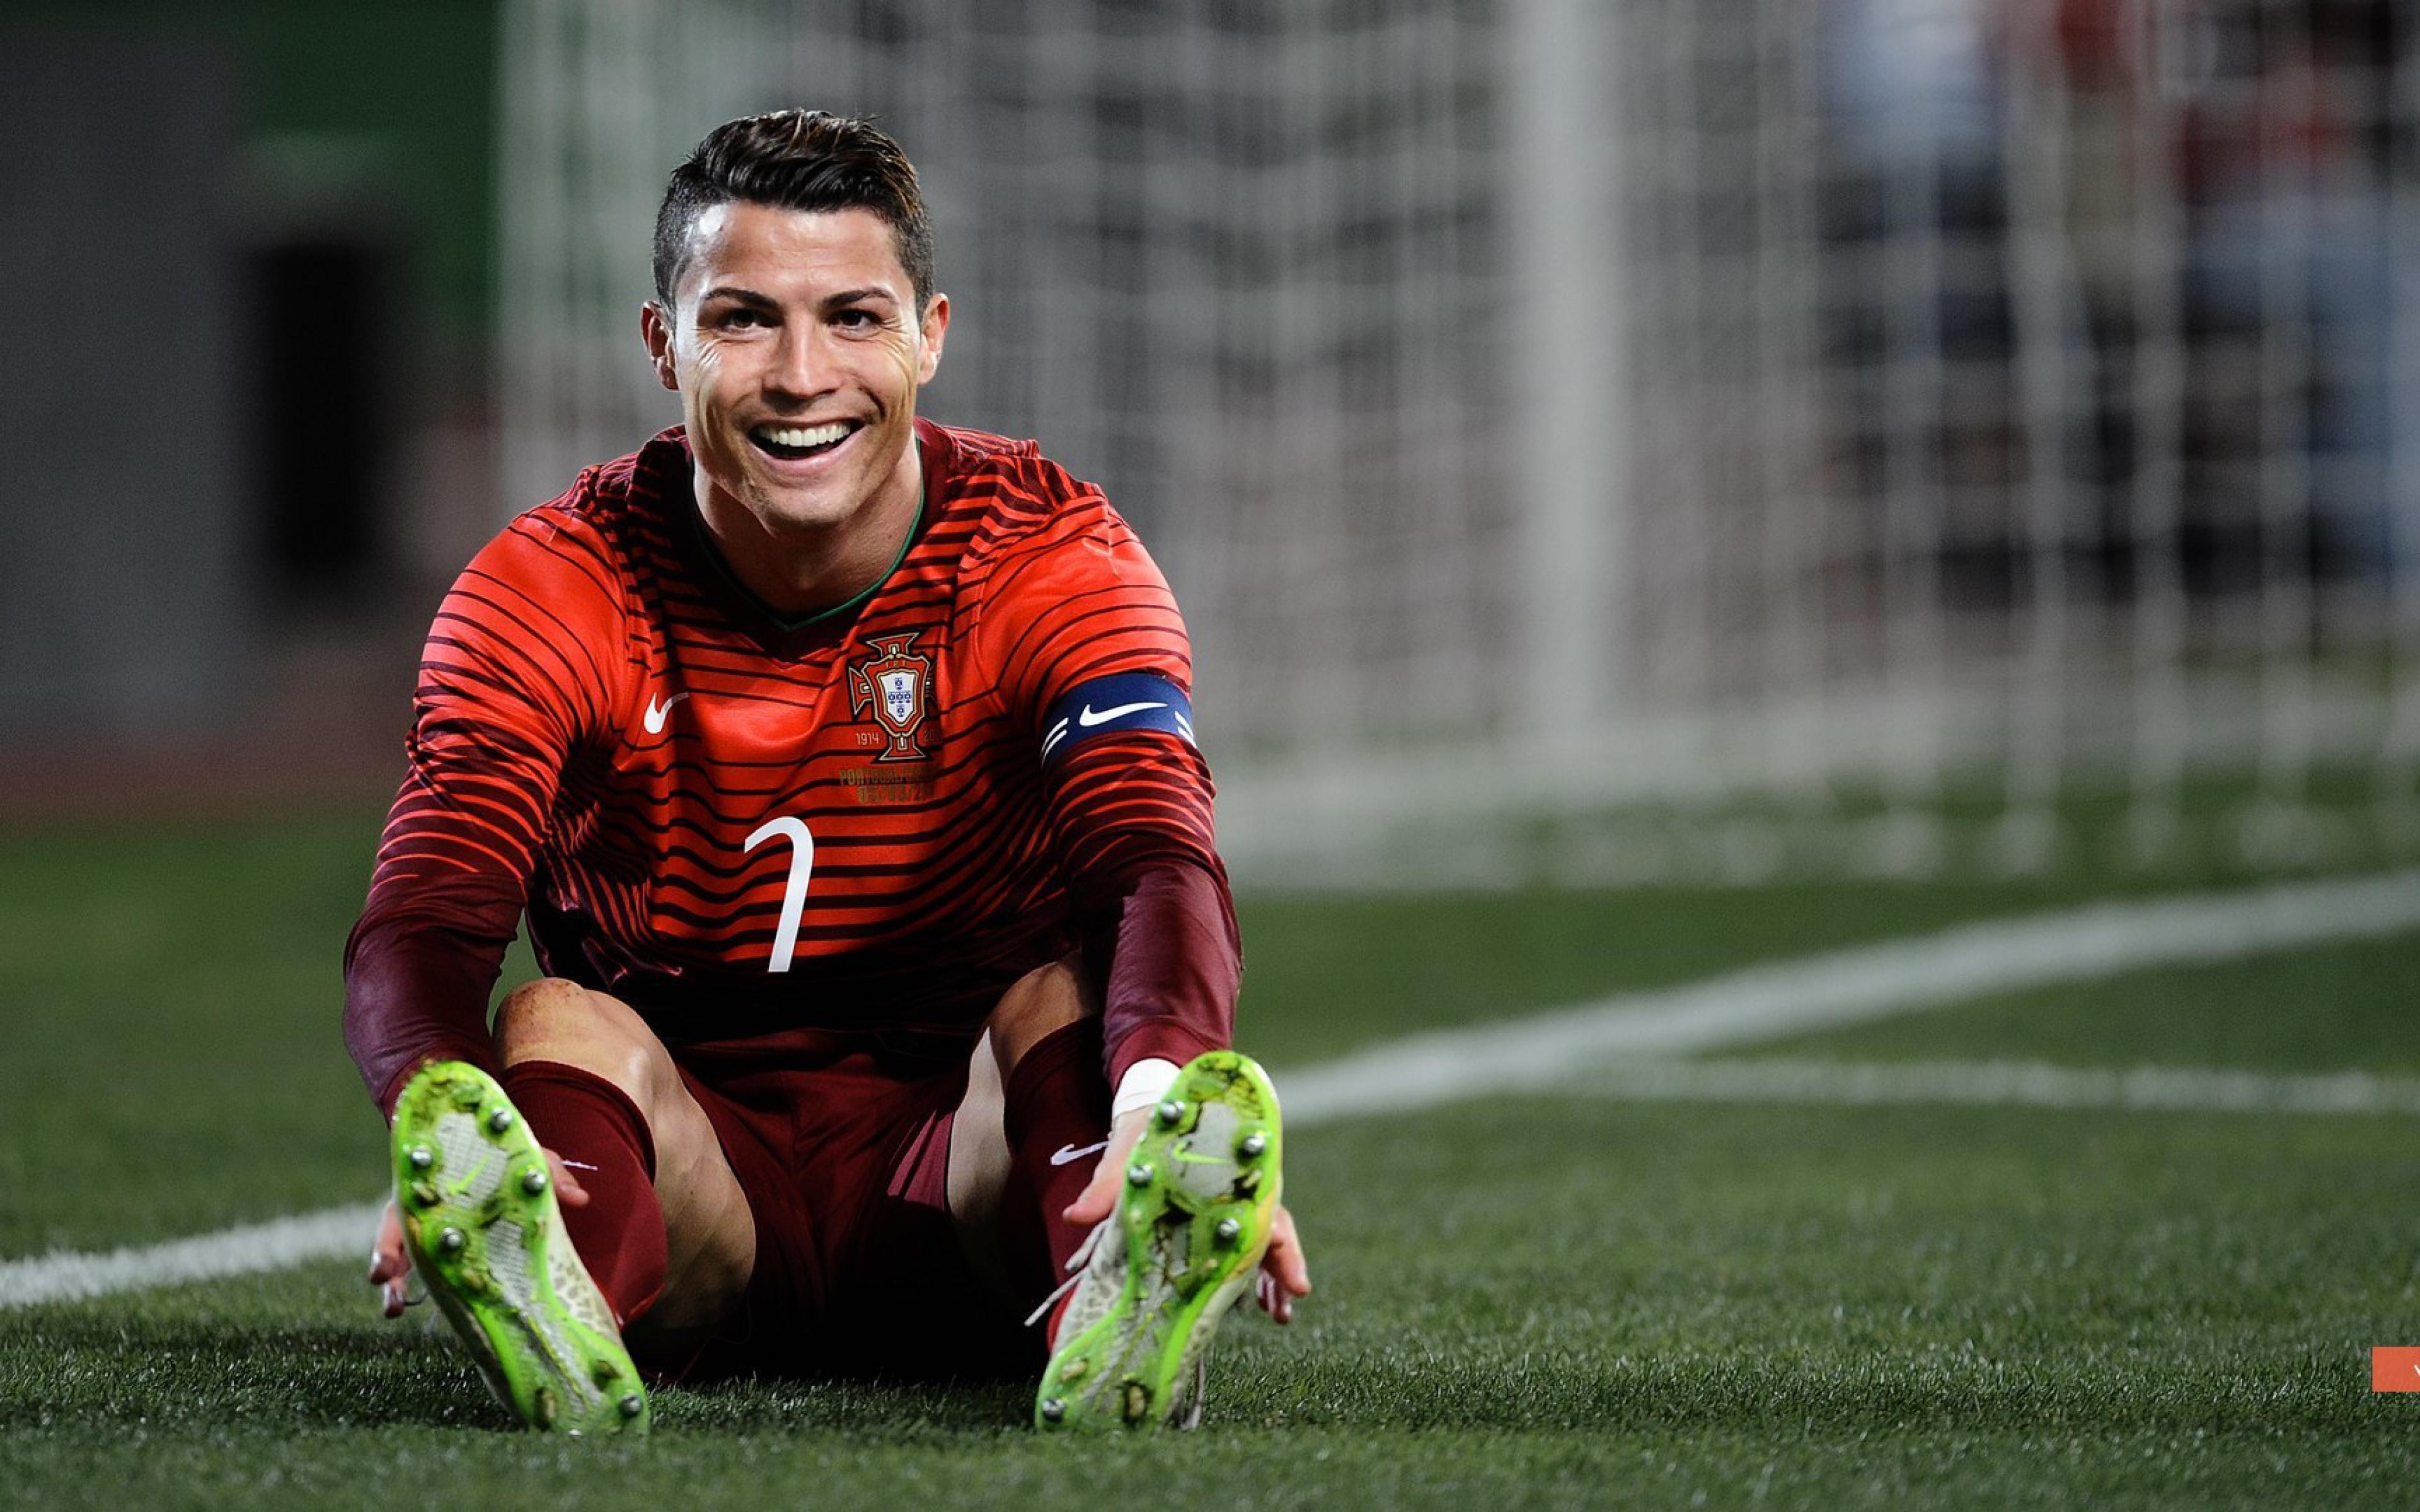 CR7, HD Sports, 4k Wallpapers, Images, Backgrounds, Photos and